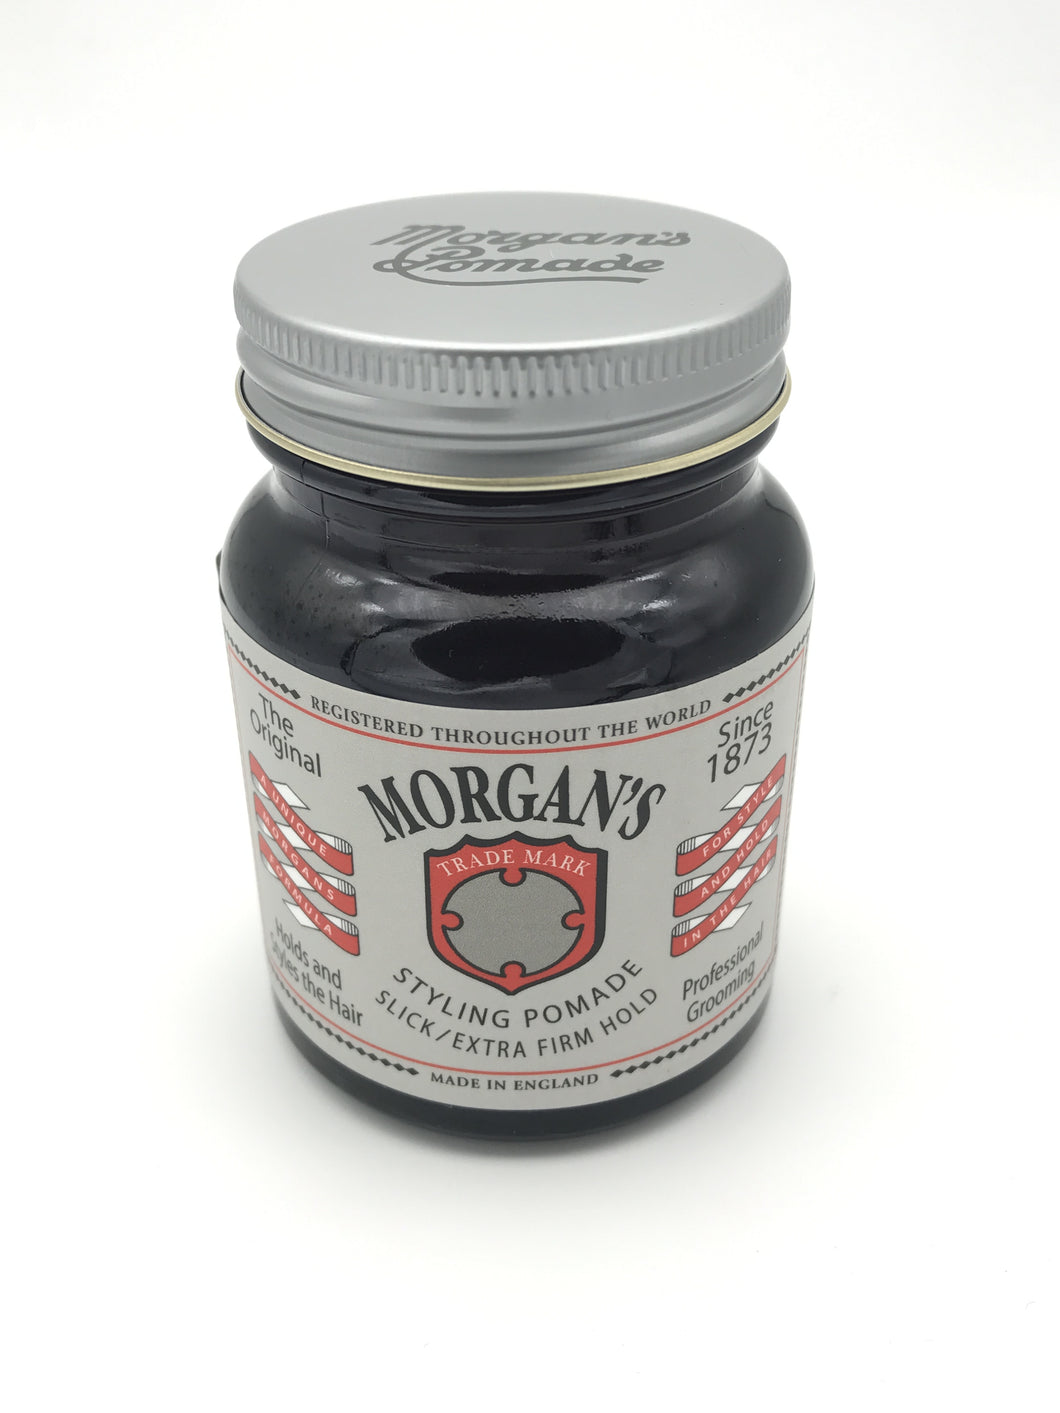 Morgan's Extra Firm Hold Pomade